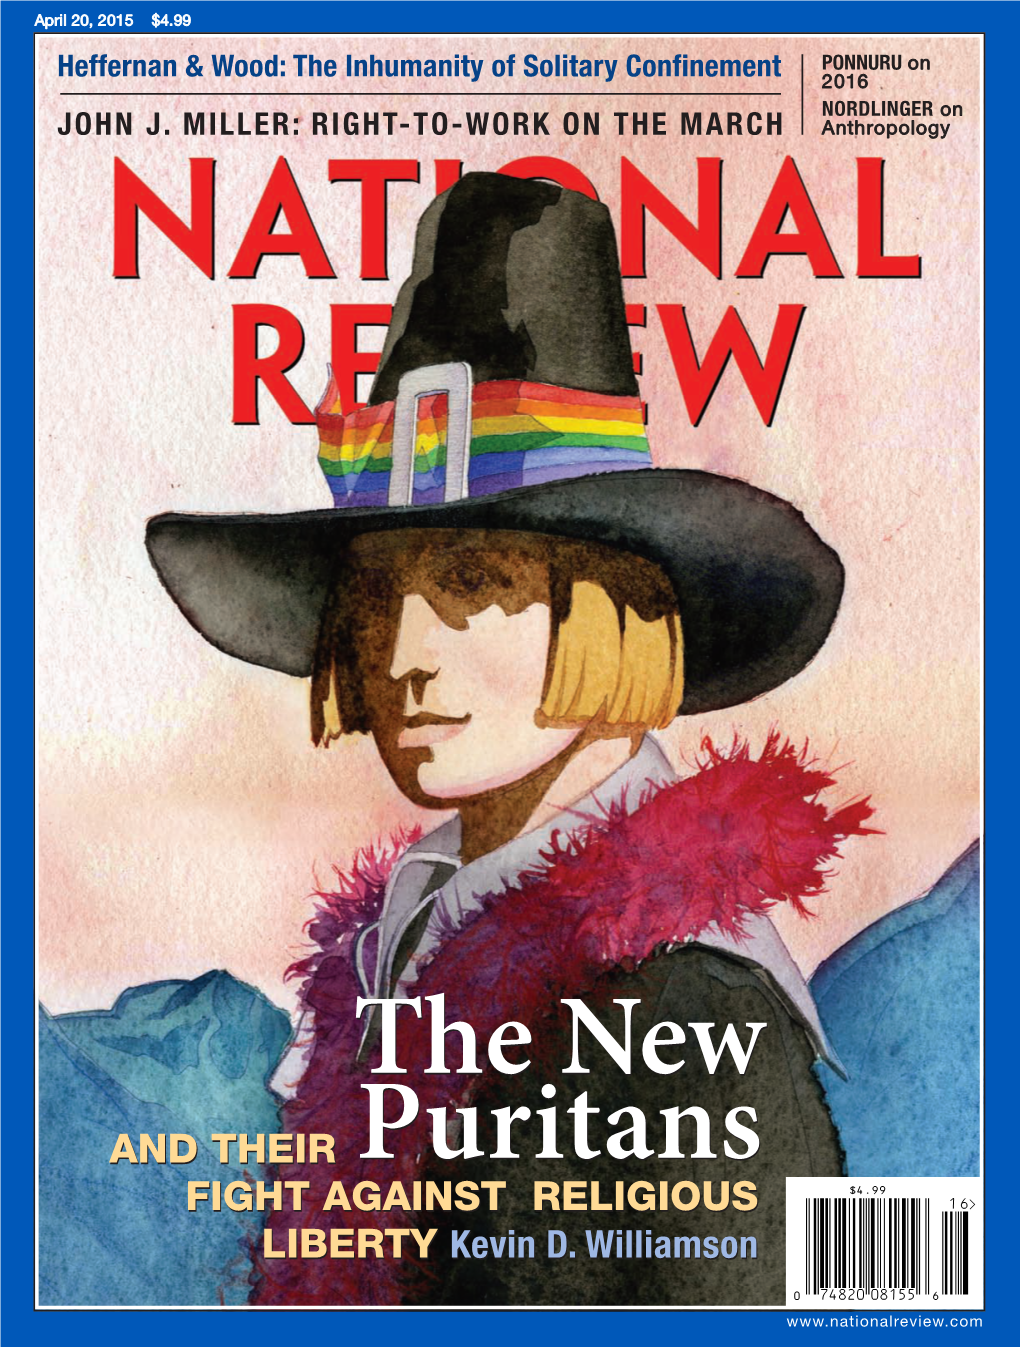 The New Puritans the New Puritans